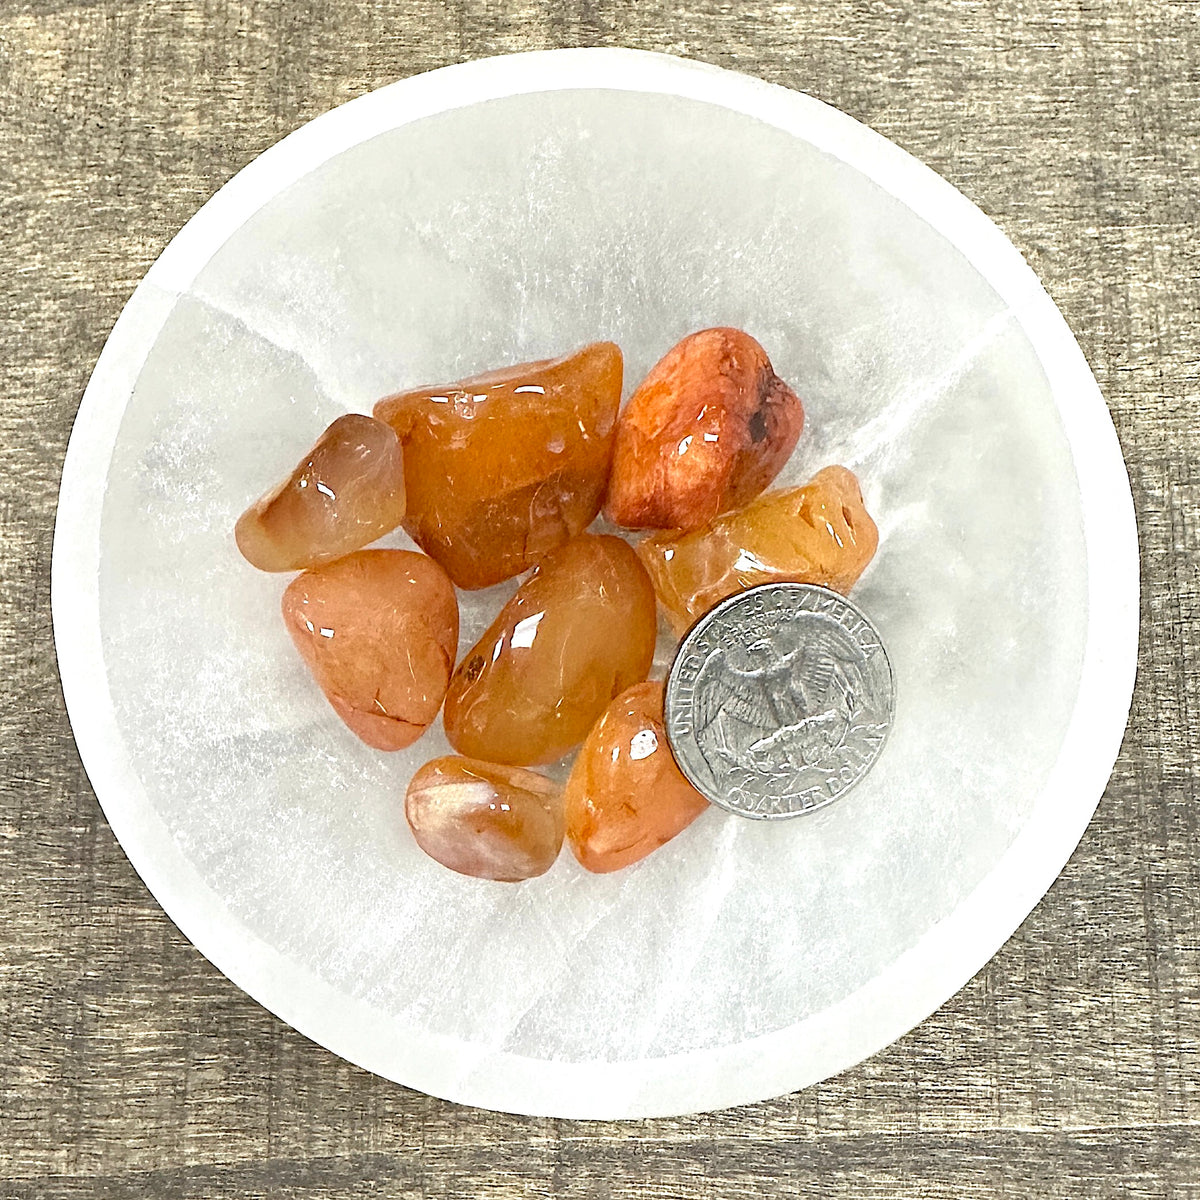 Comparison shot of a US quarter coin and various carnelian tumbled stones